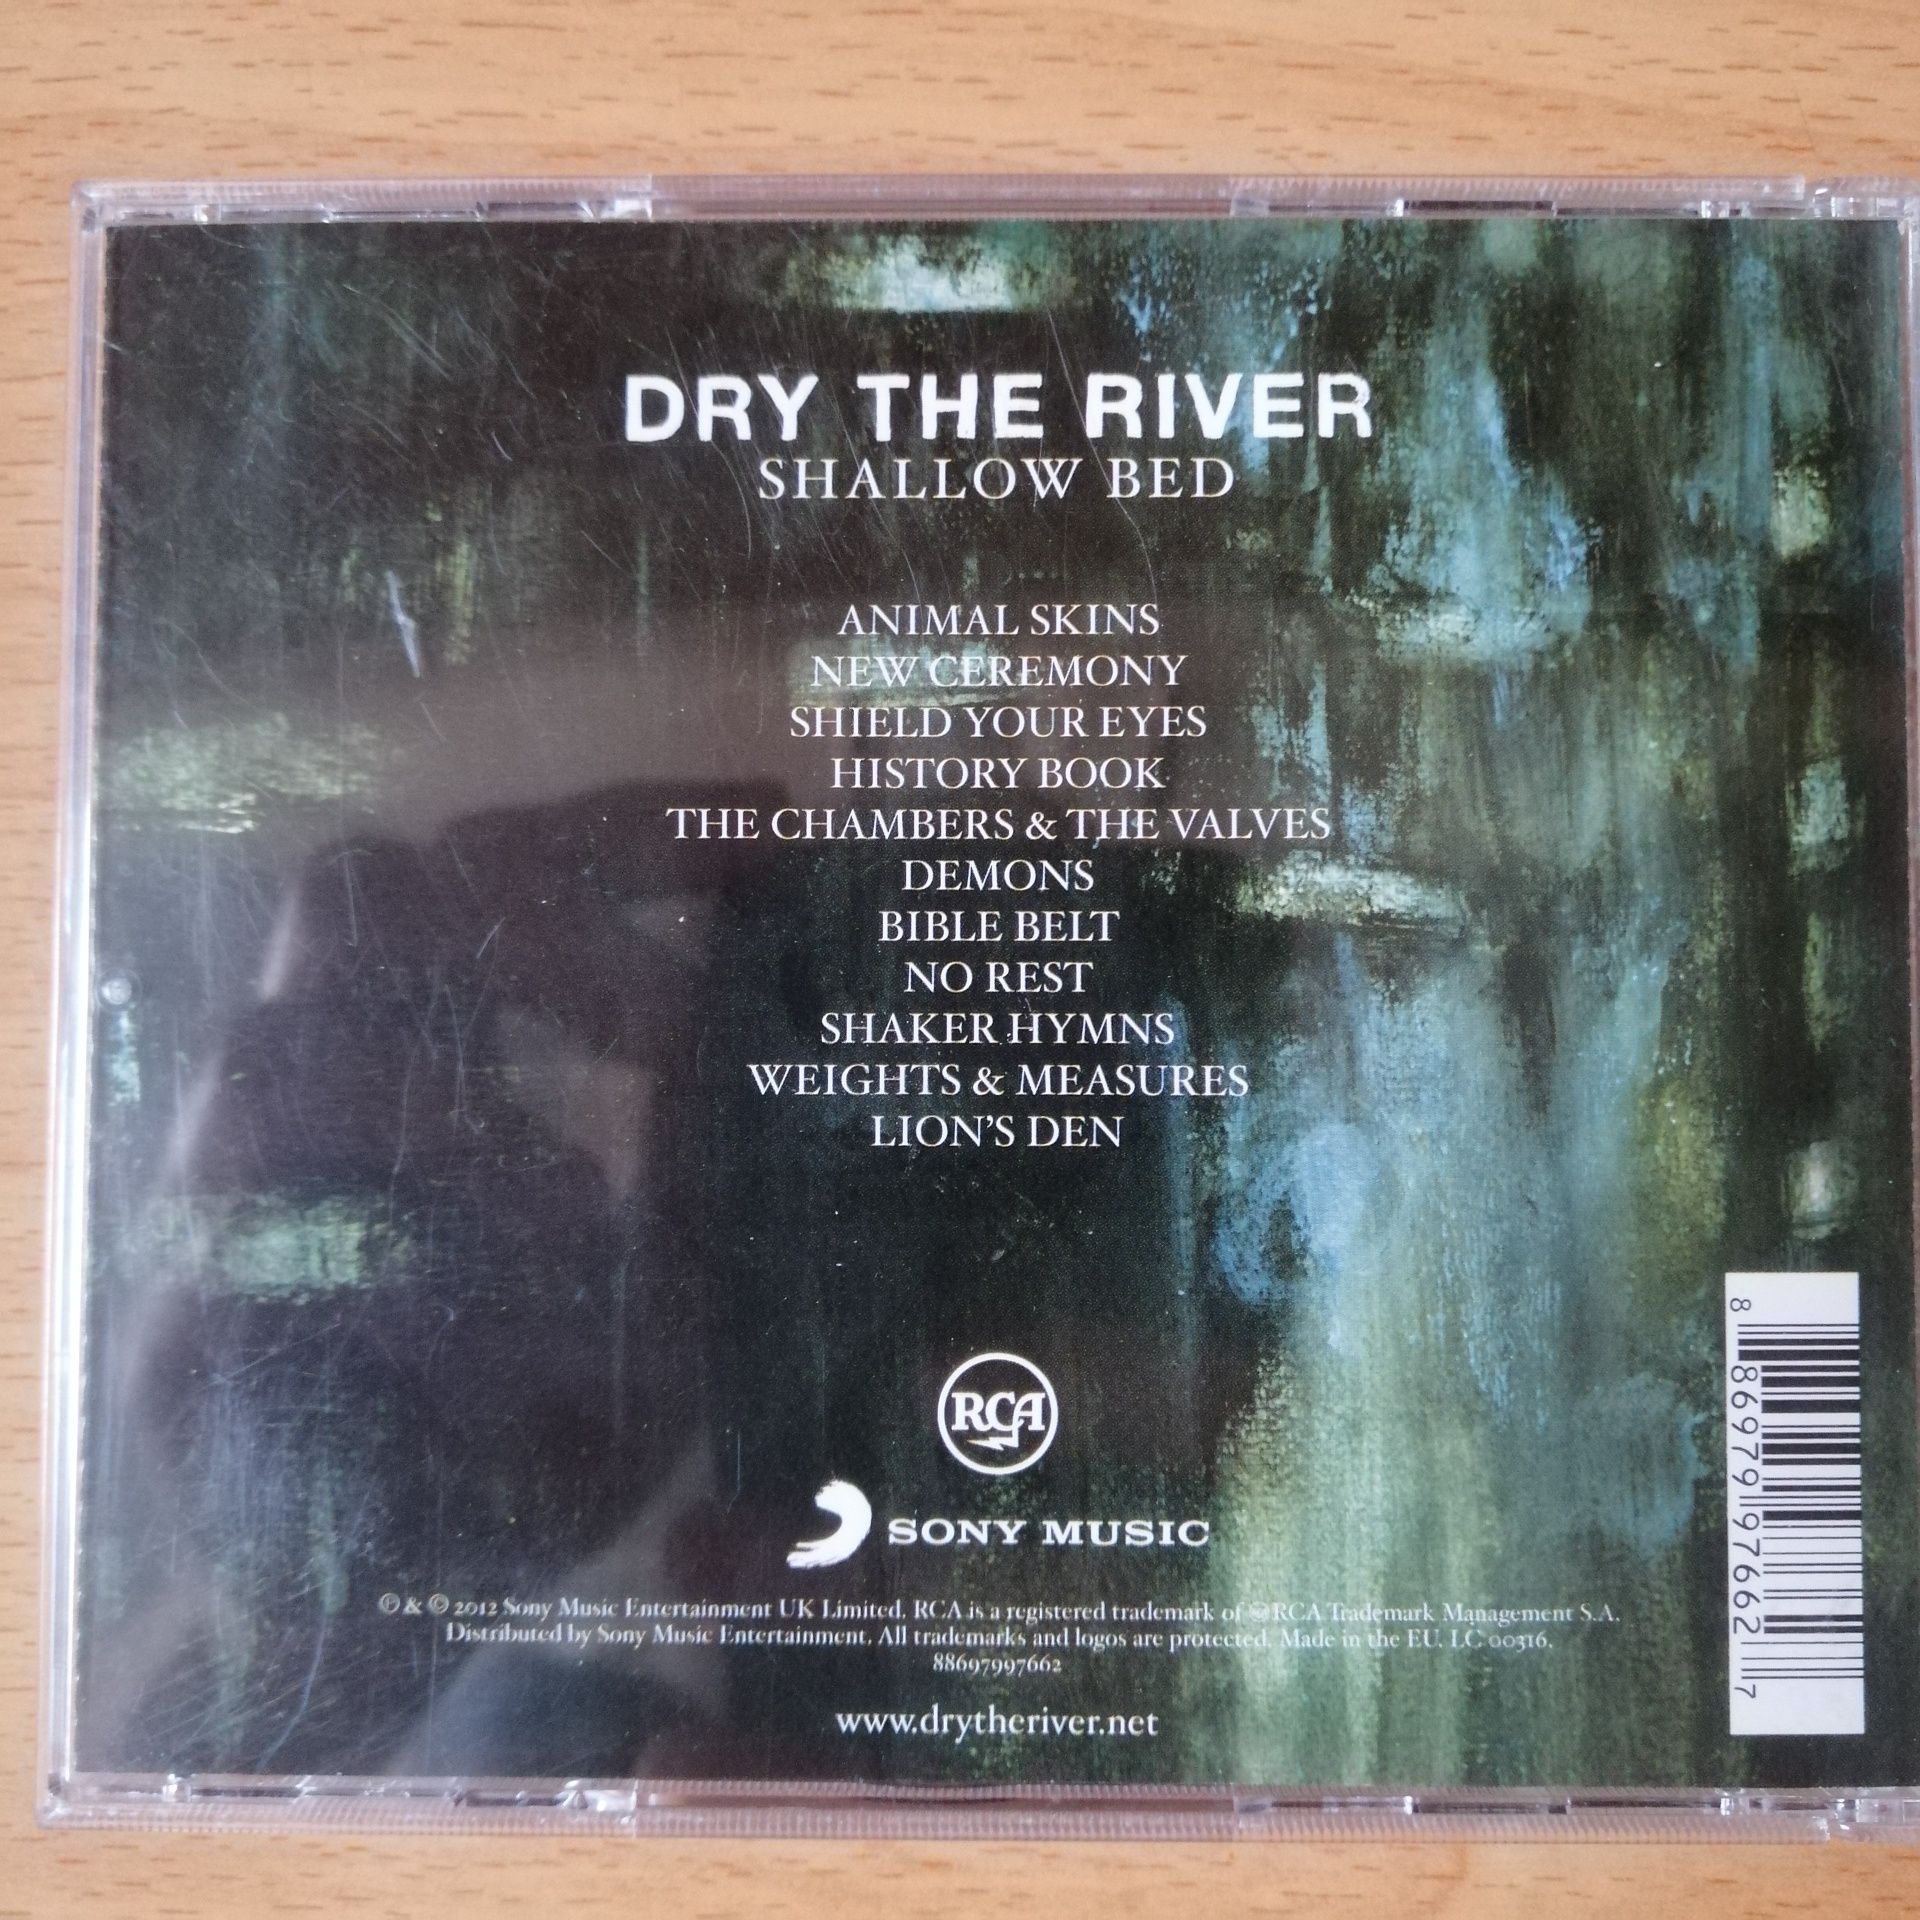 Dry The River "Shallow Bed" CD